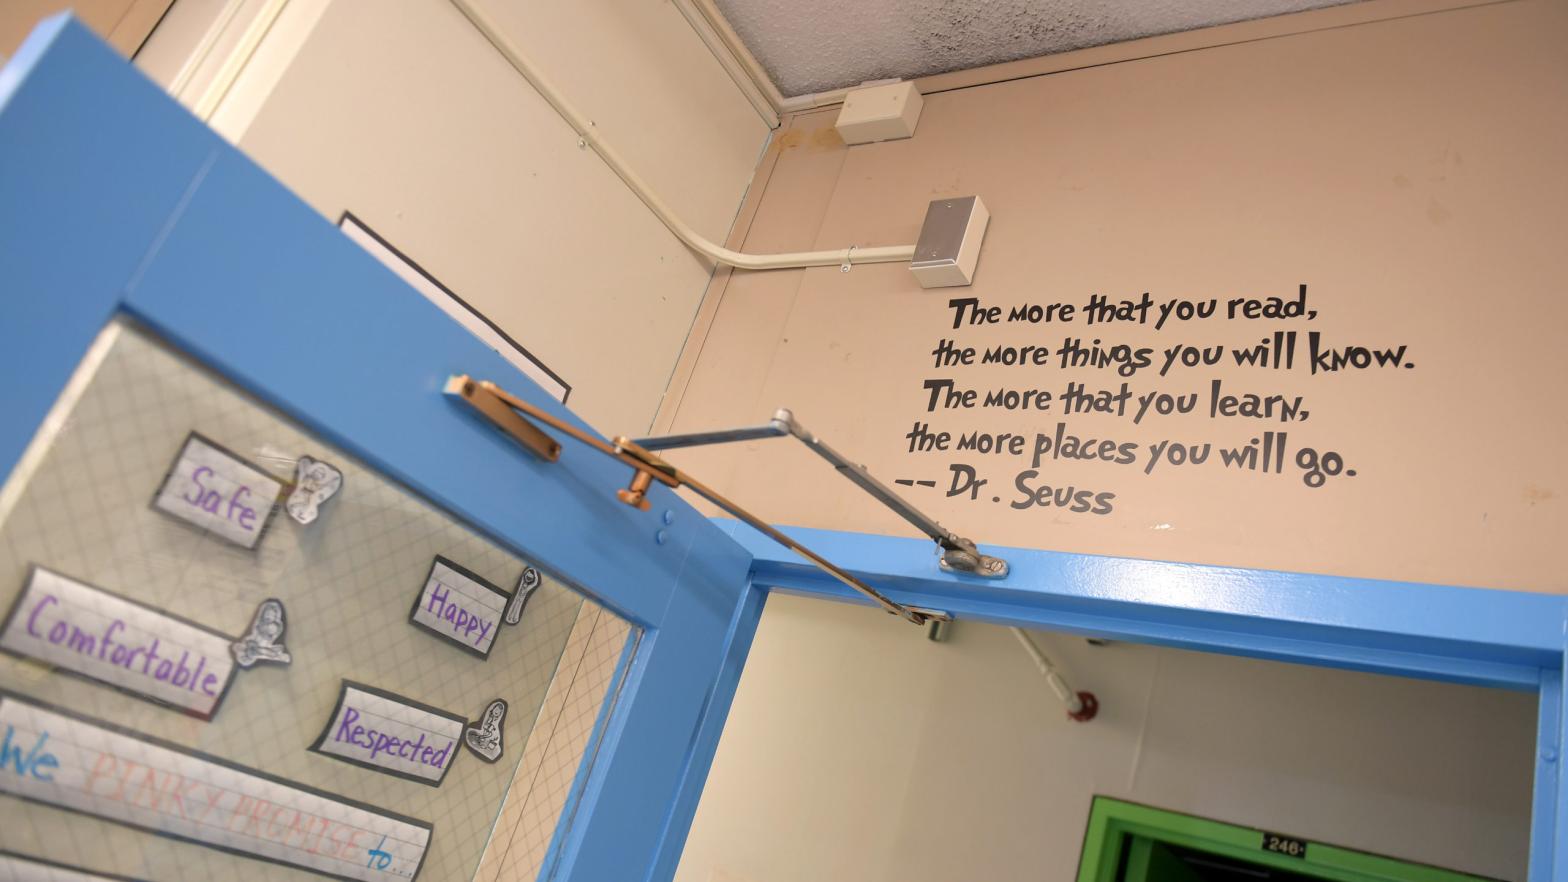 A Dr. Seuss quote is seen painted above a classroom door at a New York City public school on August 25, 2020. (Photo: Michael Loccisano, Getty Images)